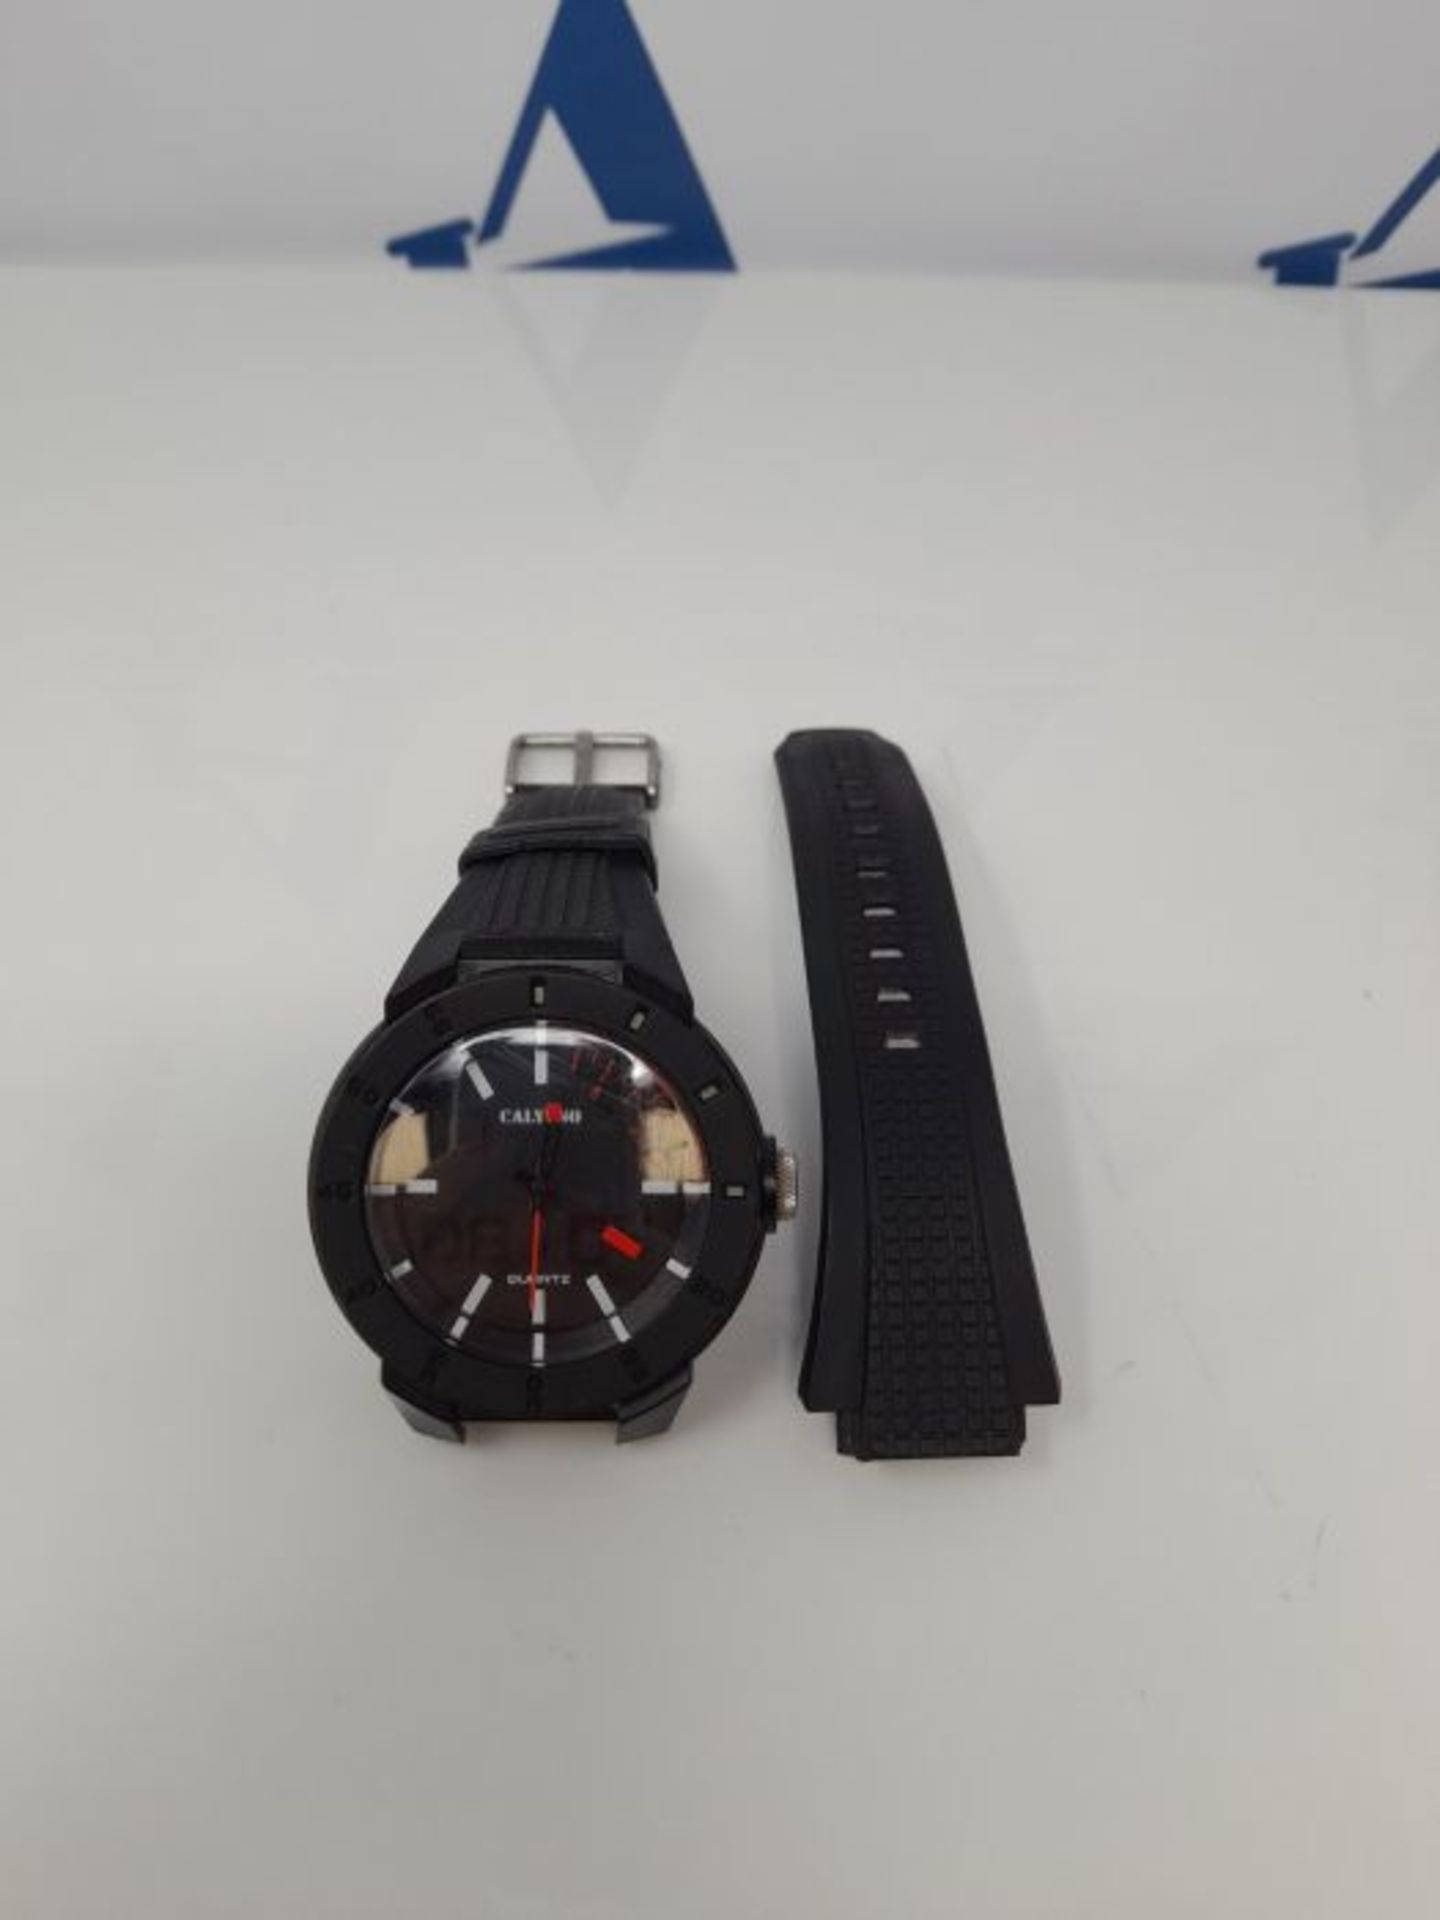 Calypso Men's Quartz Watch with Black Dial Analogue Display and Black Plastic Strap K5 - Image 2 of 3